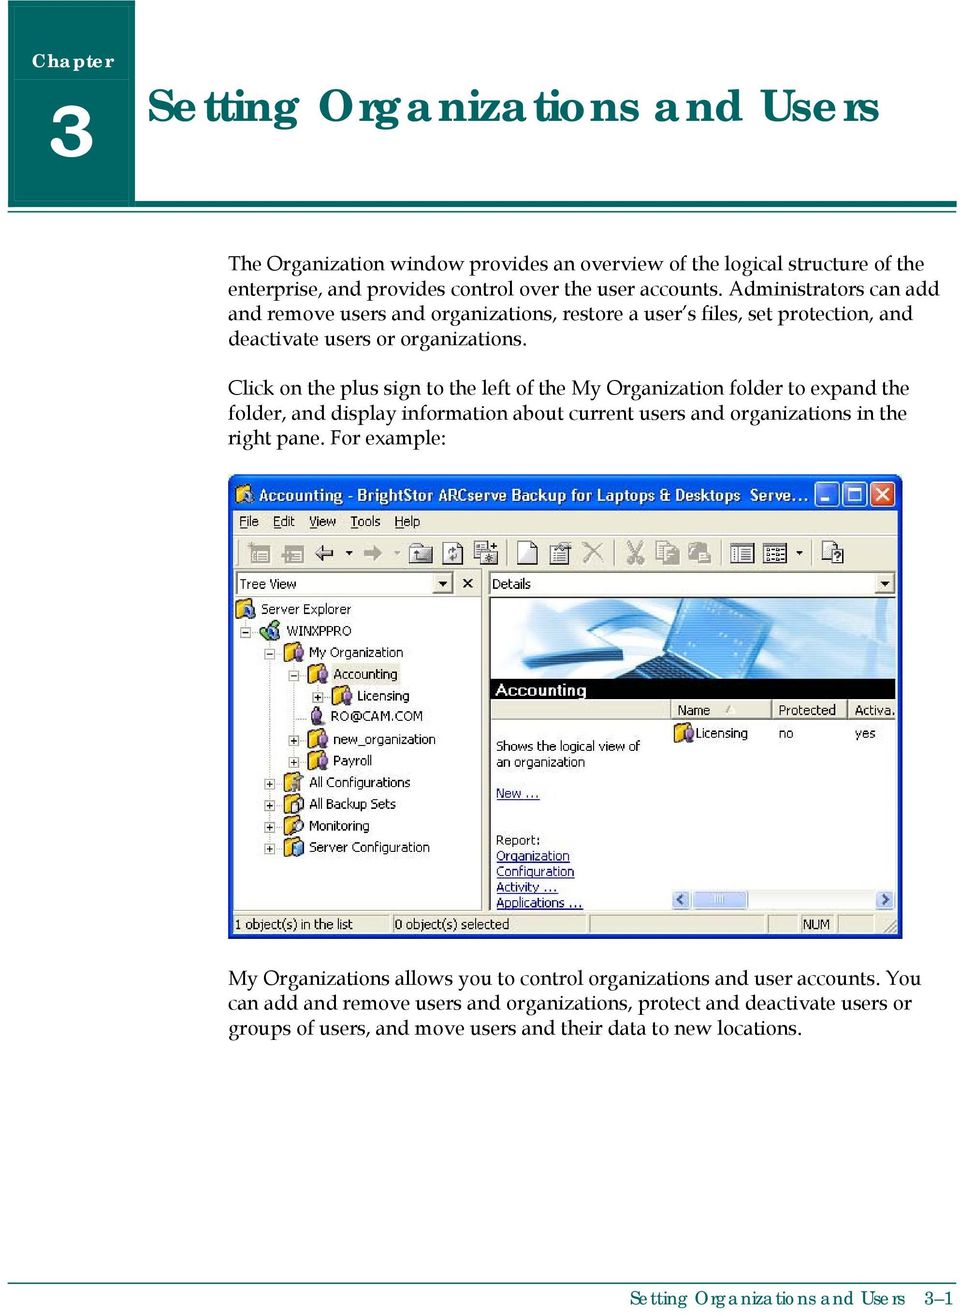 Click on the plus sign to the left of the My Organization folder to expand the folder, and display information about current users and organizations in the right pane.